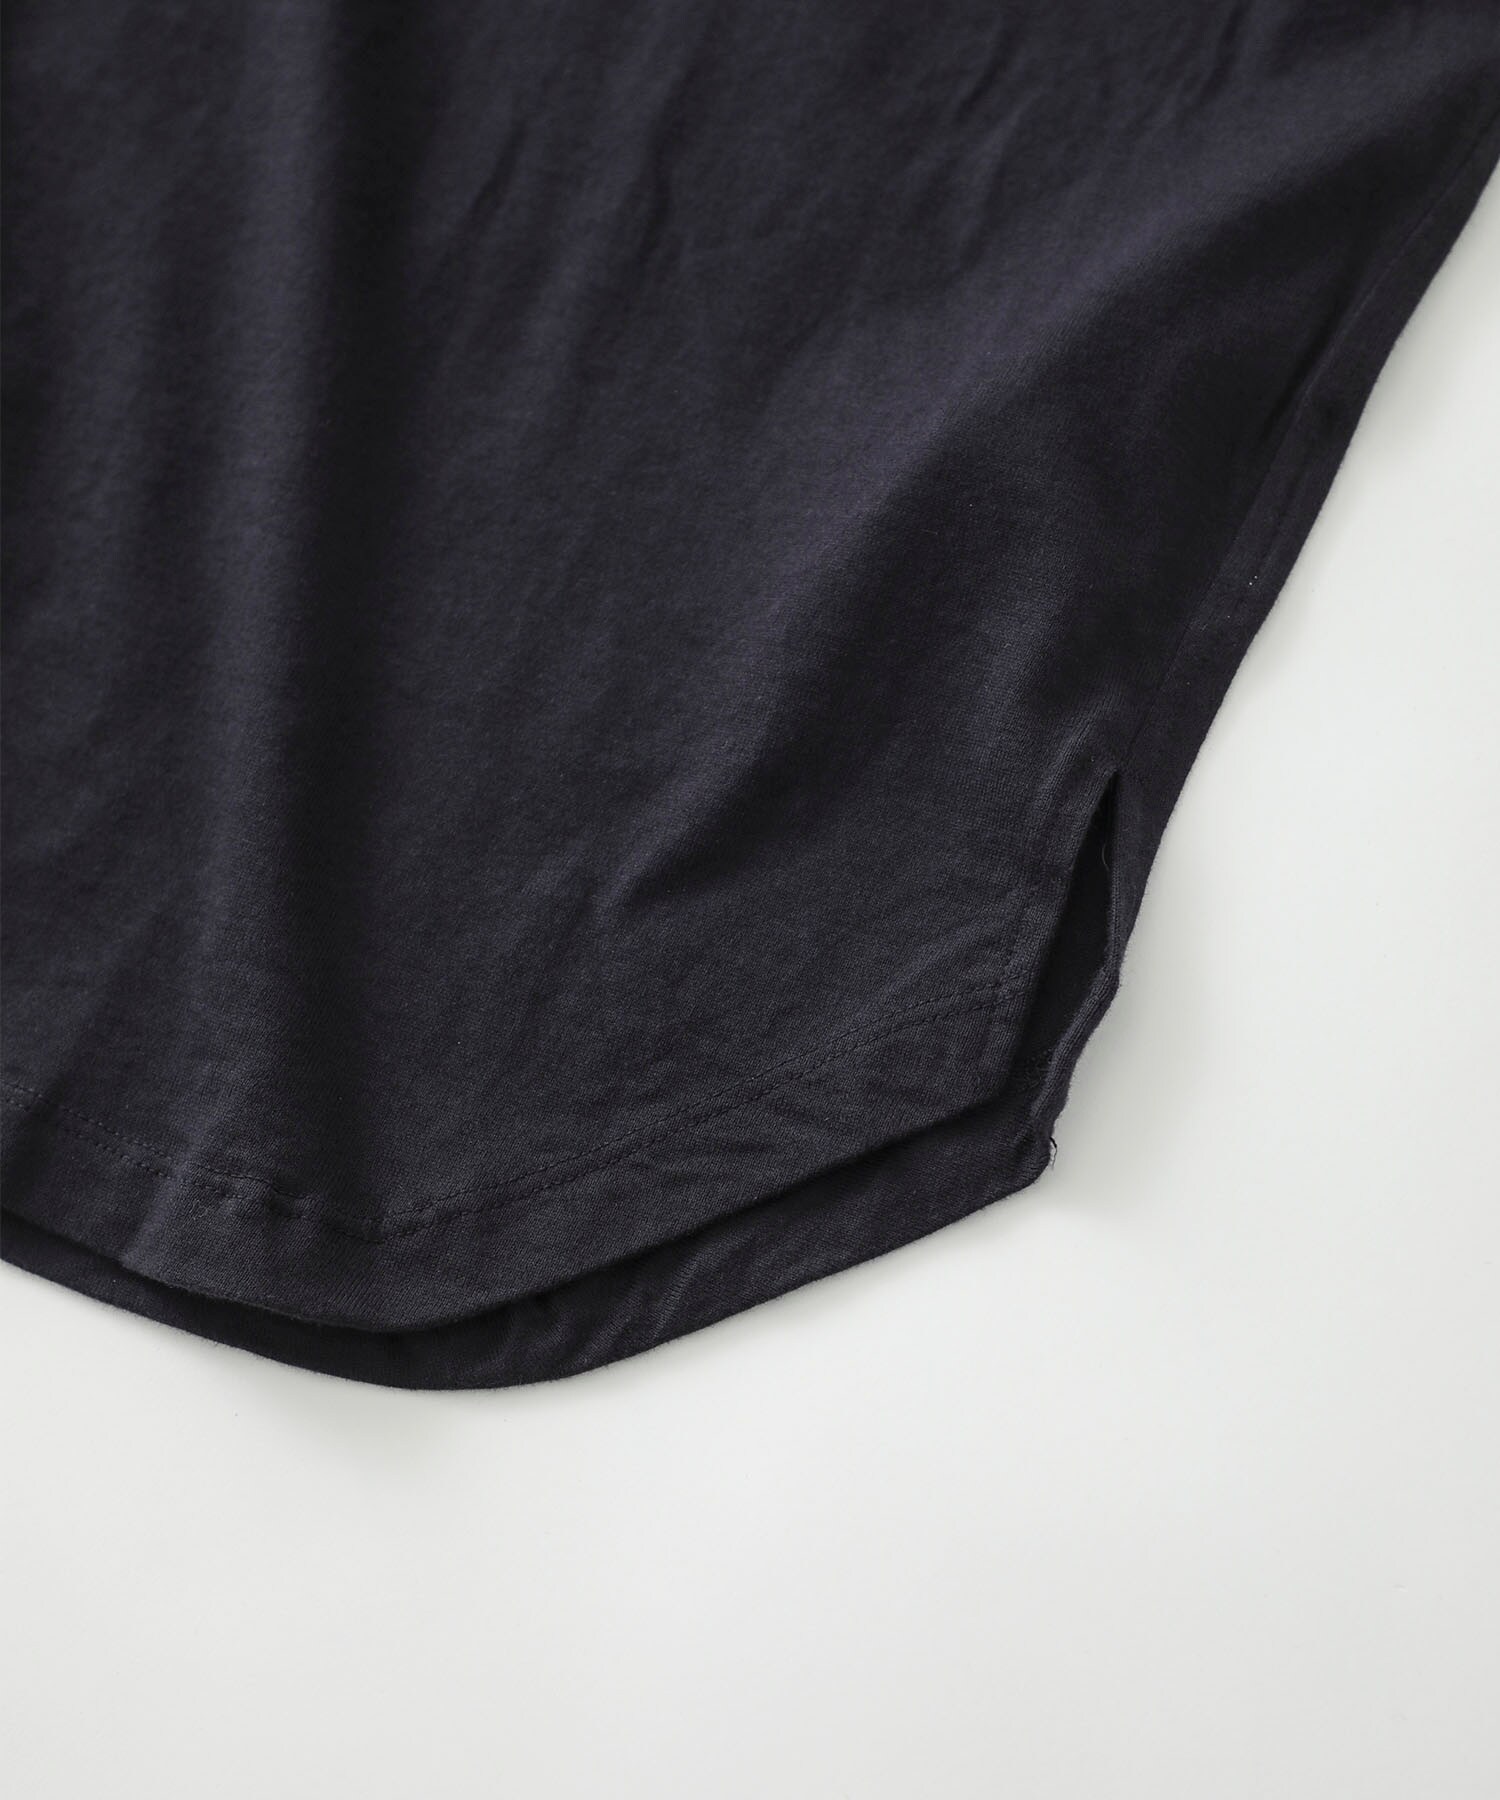 DWELLER S/S TEE 39 by LORD ECHO nonnative